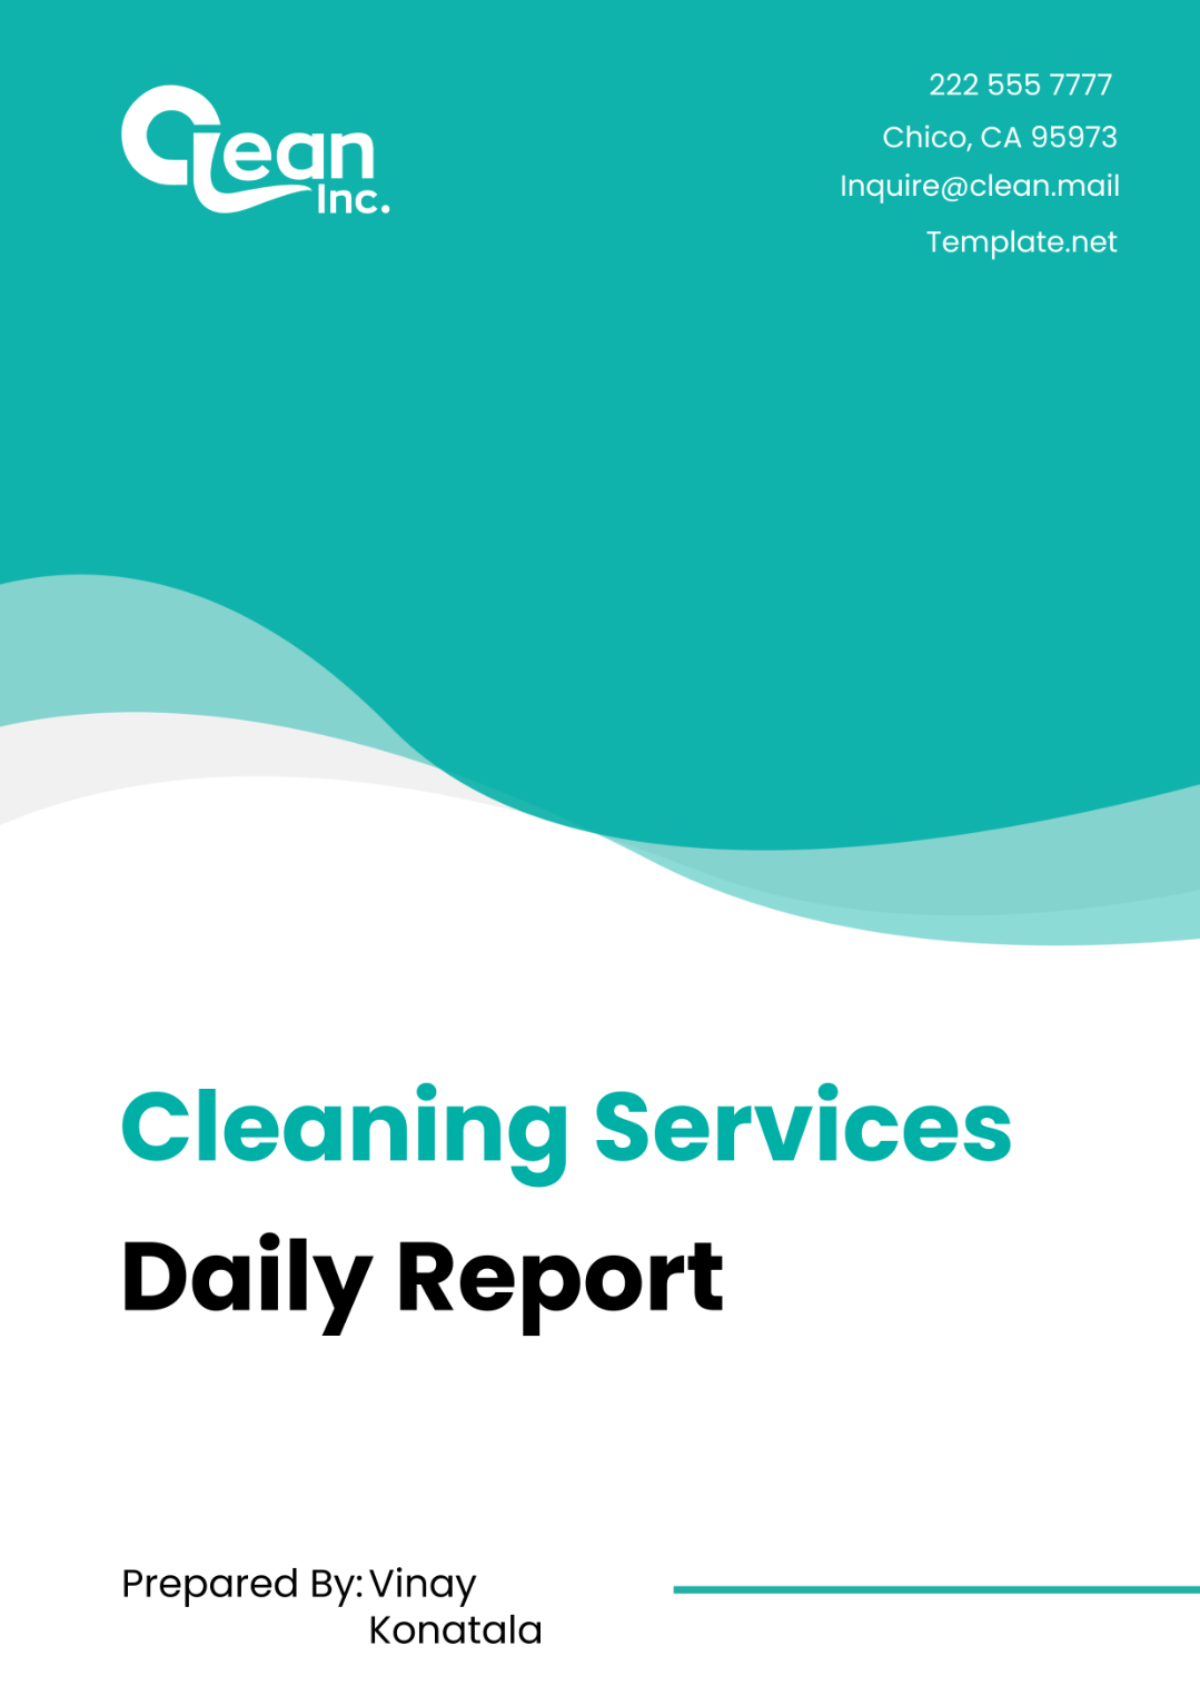 Cleaning Services Daily Report Template